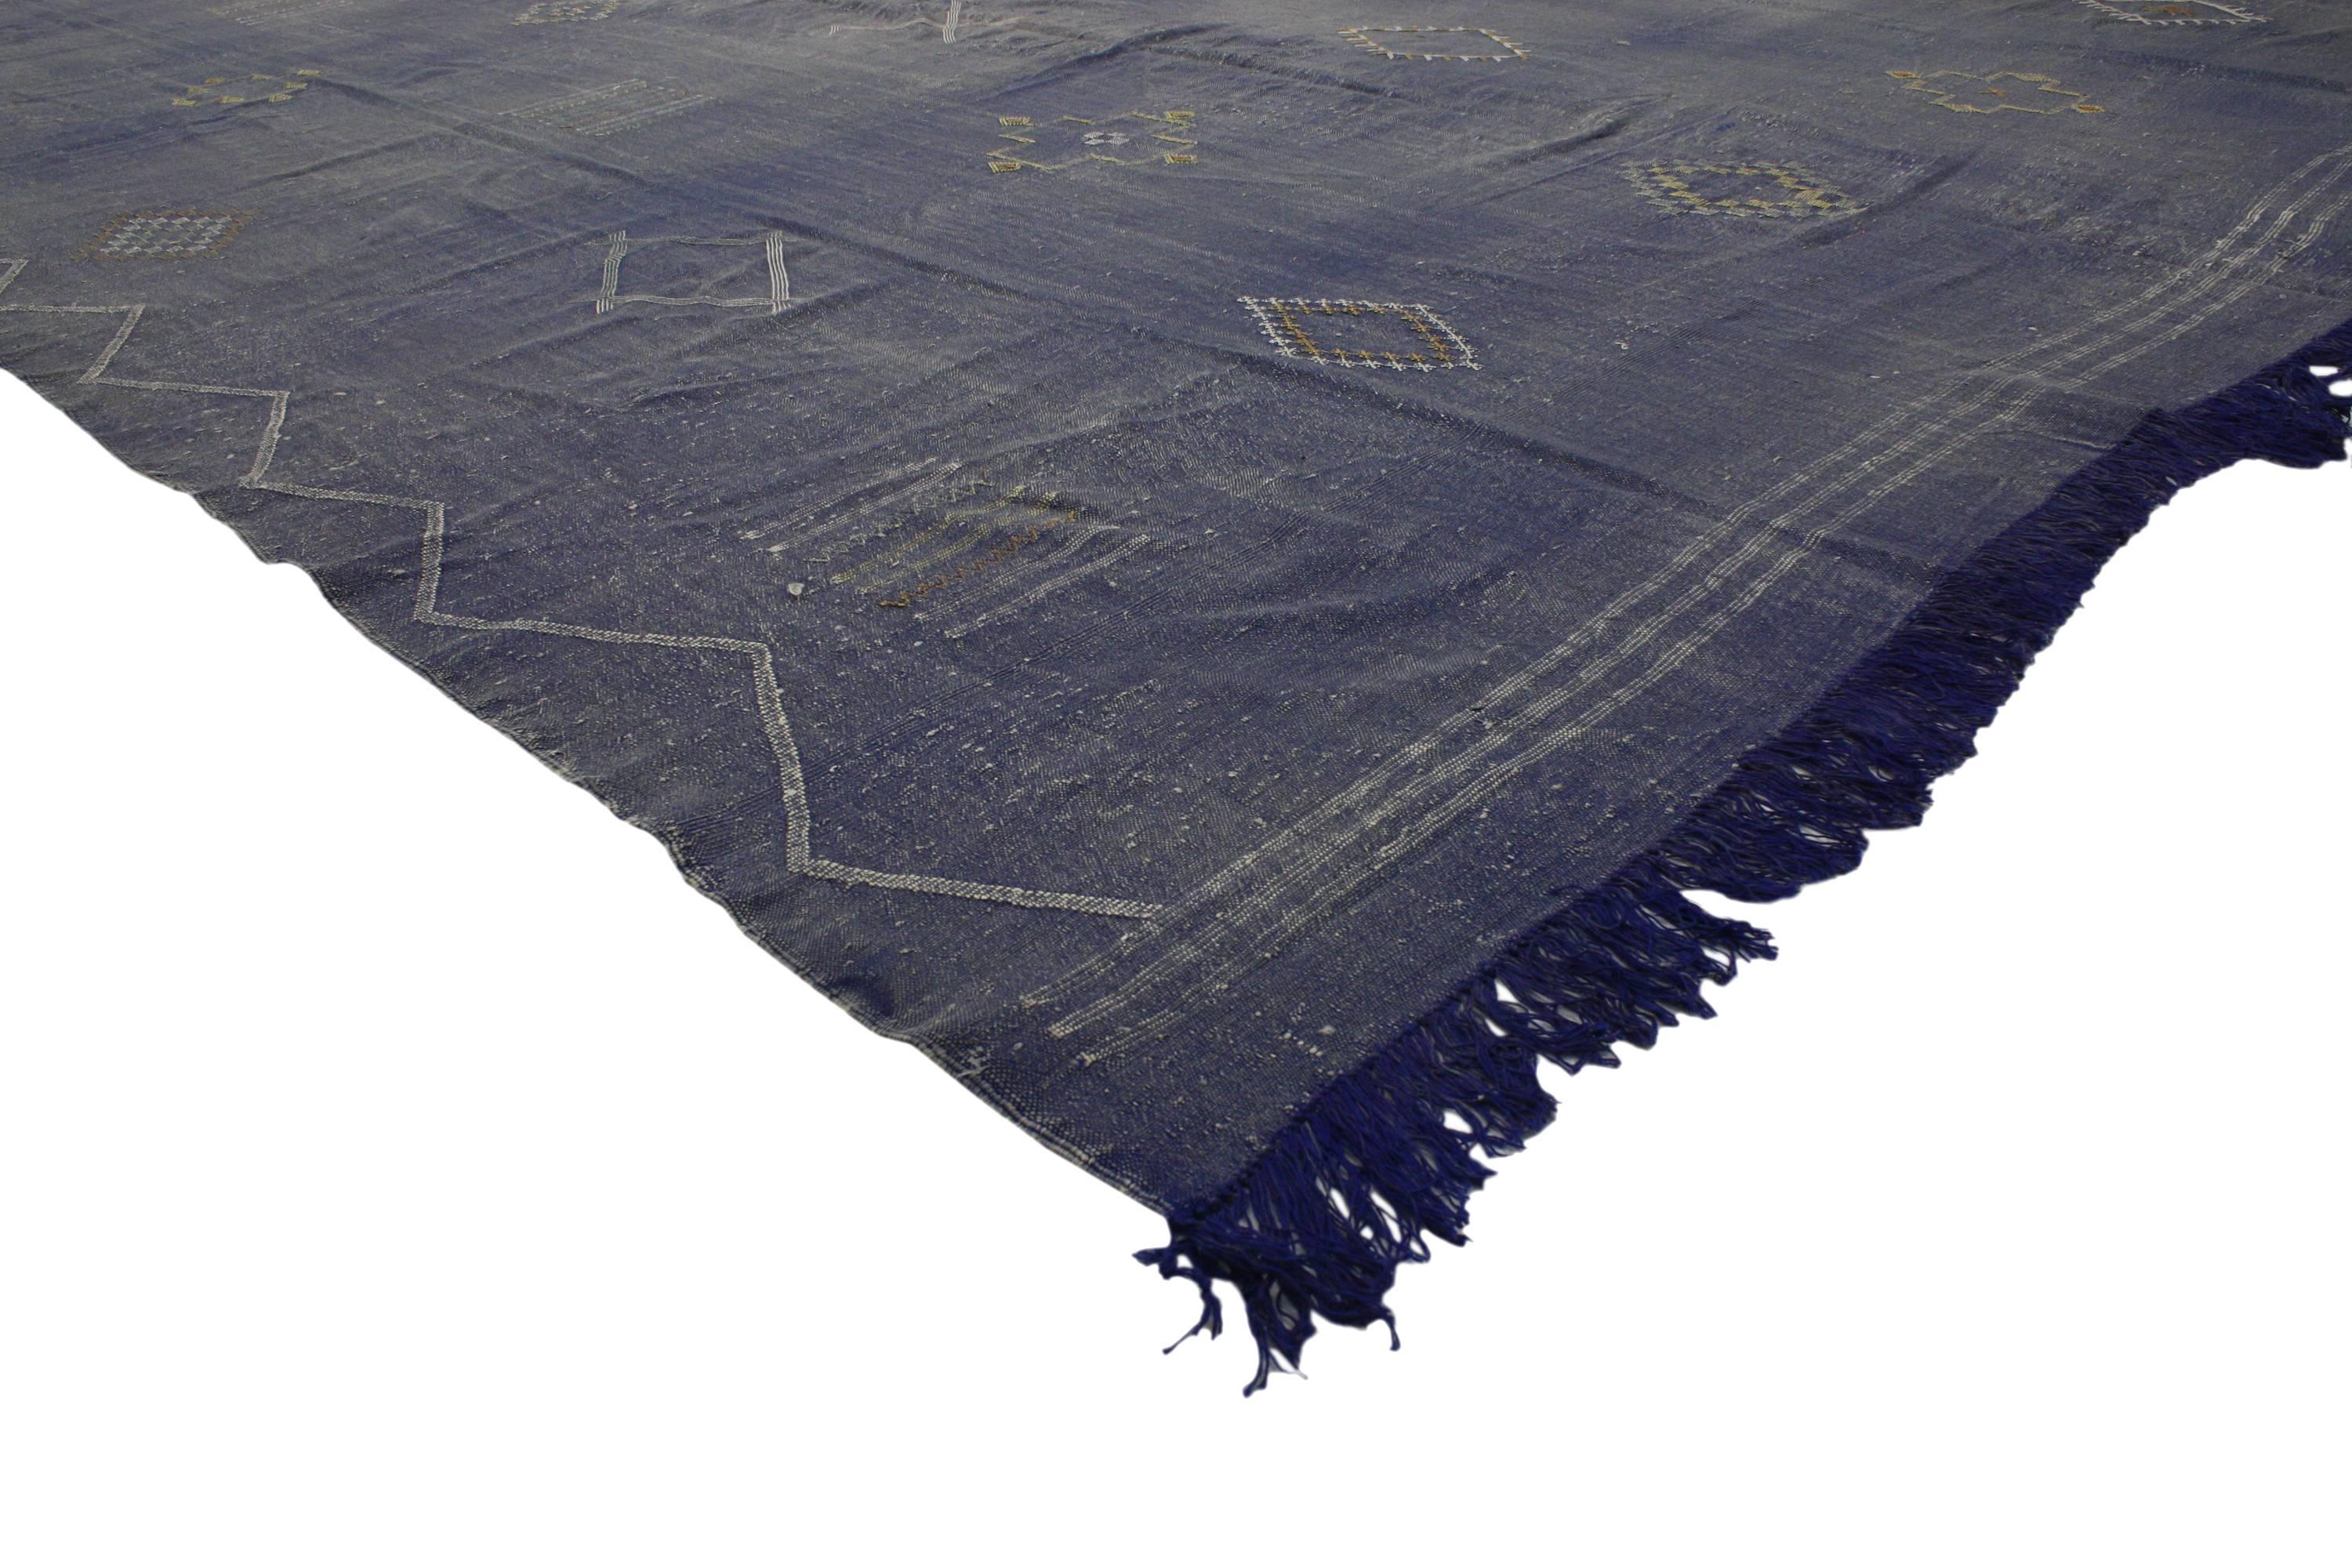 Sabra Cactus silk vintage Moroccan Kilim rug handwoven by the Berber Tribes of Morocco. Features colorful geometric shapes and Berber symbols of nature on a violet blue field. Among the multitude of designs, colors and sizes available, flat-weave